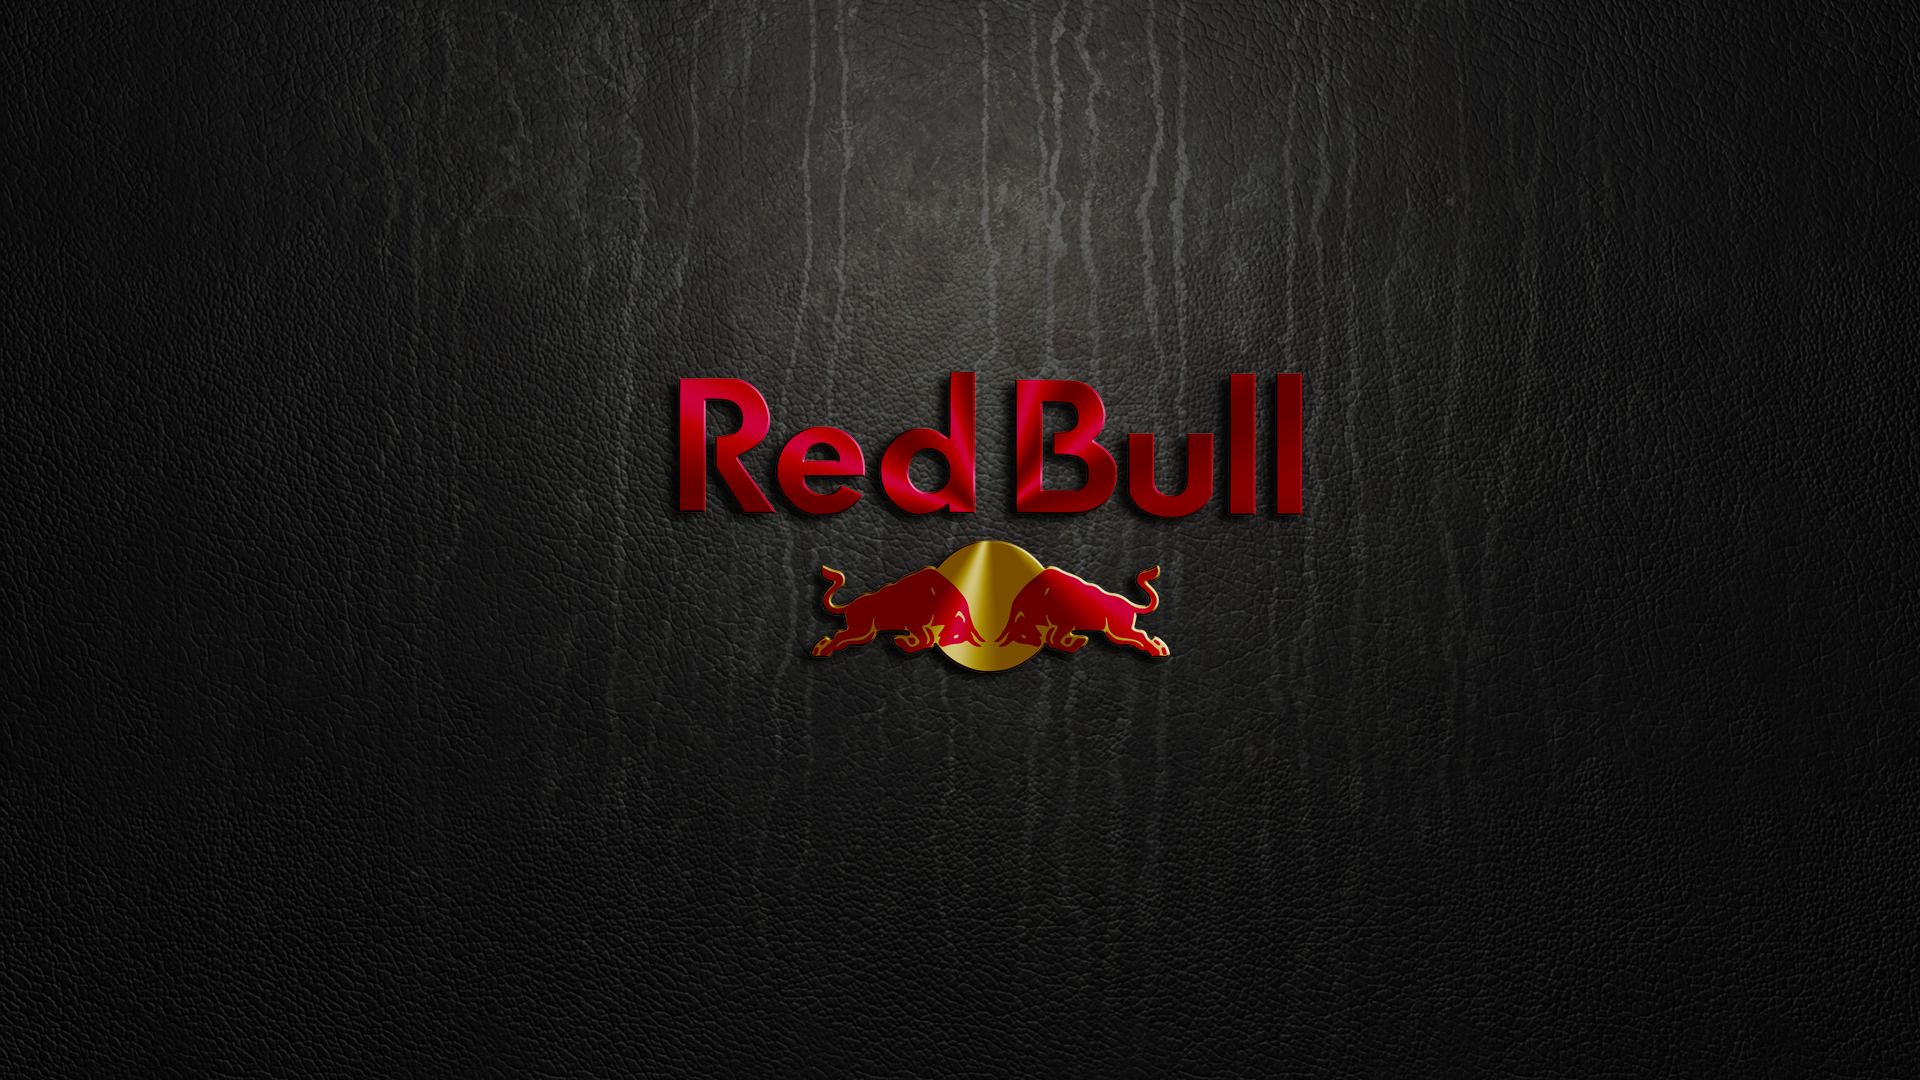 products, red bull Full HD